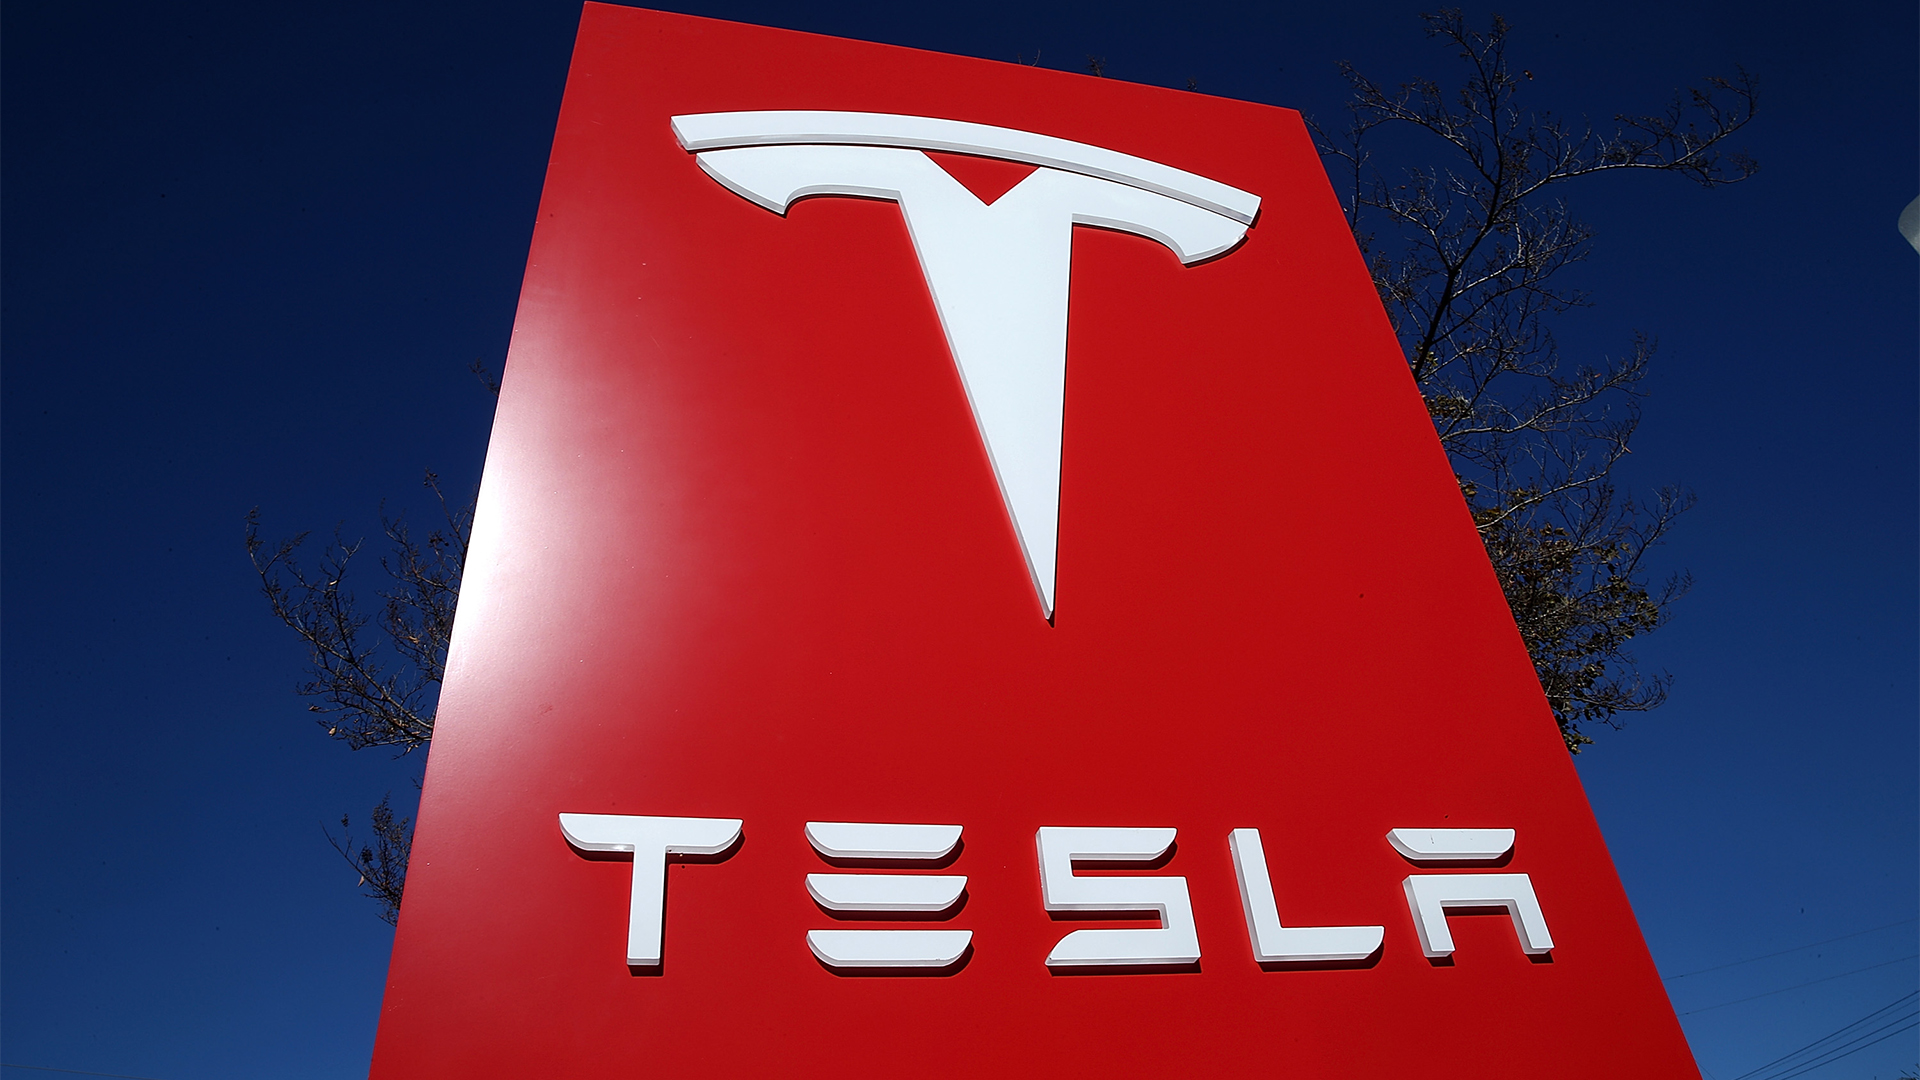 Former Black Tesla Worker Given Two Weeks To Accept $15M In Appealed Lawsuit Agreement